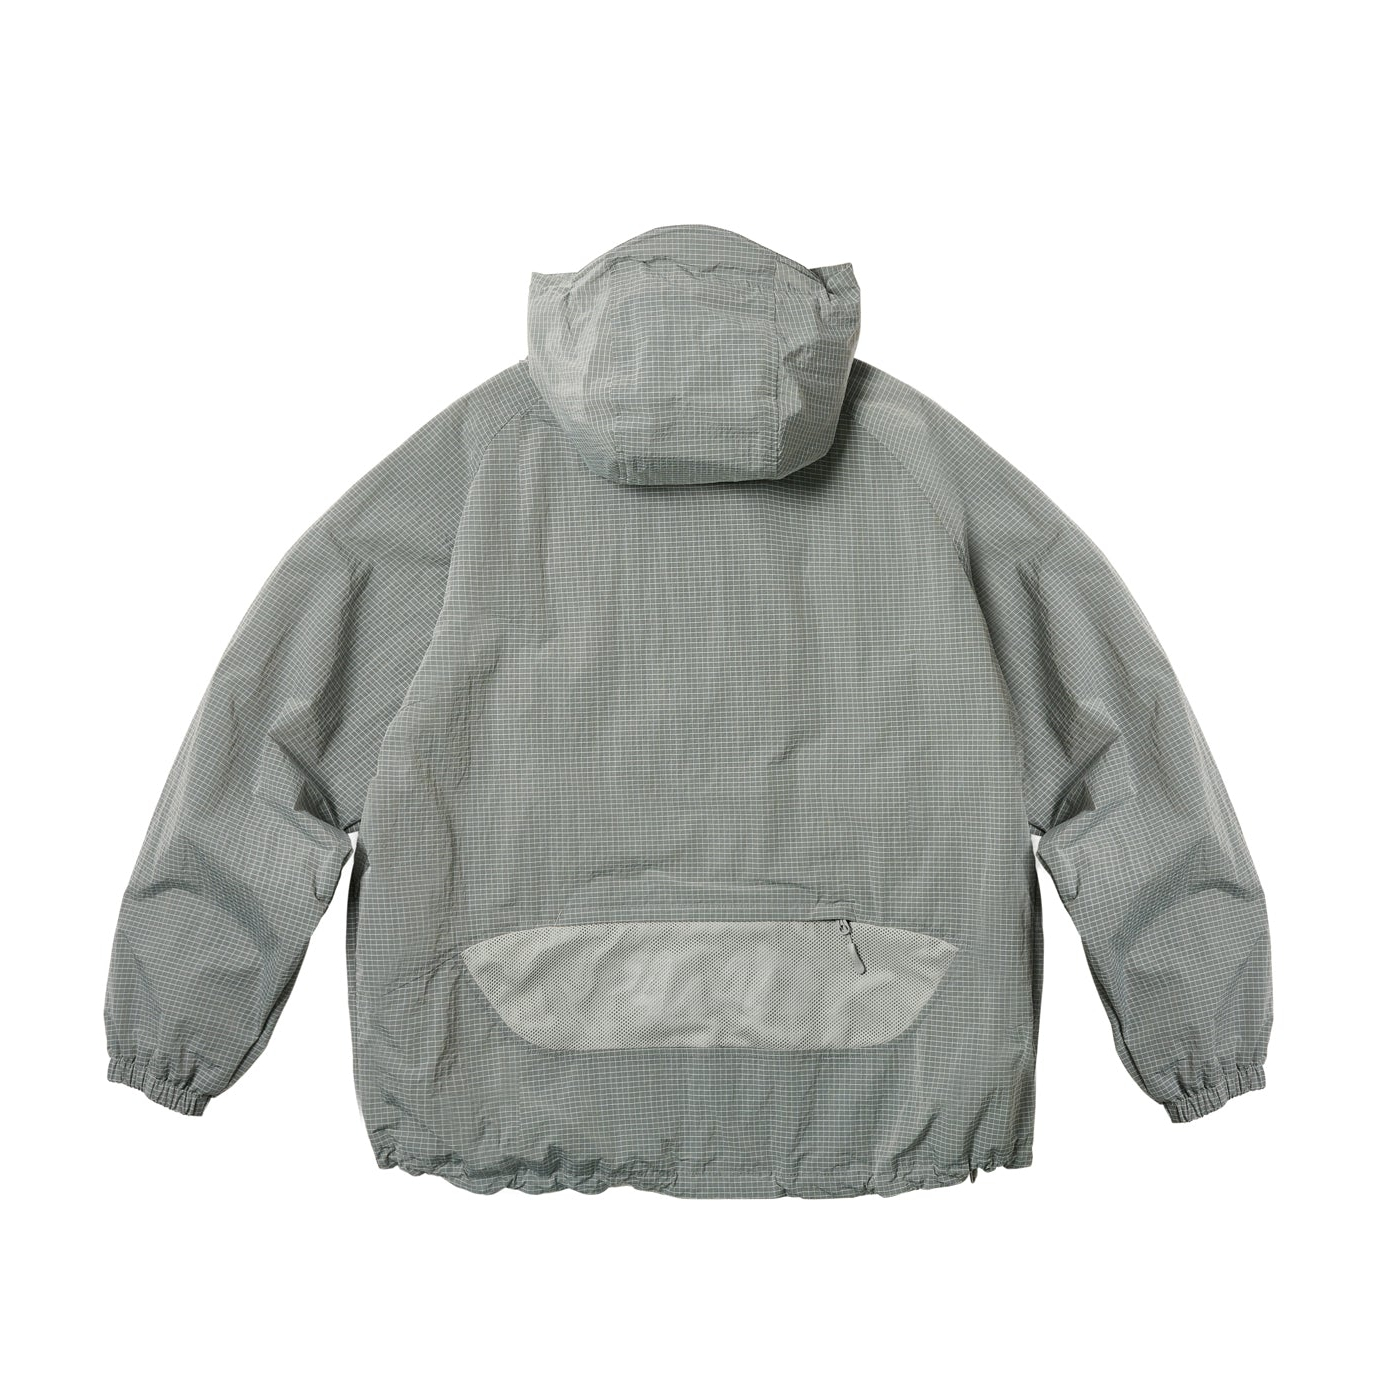 Thumbnail Y-RIPSTOP SHELL JACKET STEEL GREY one color